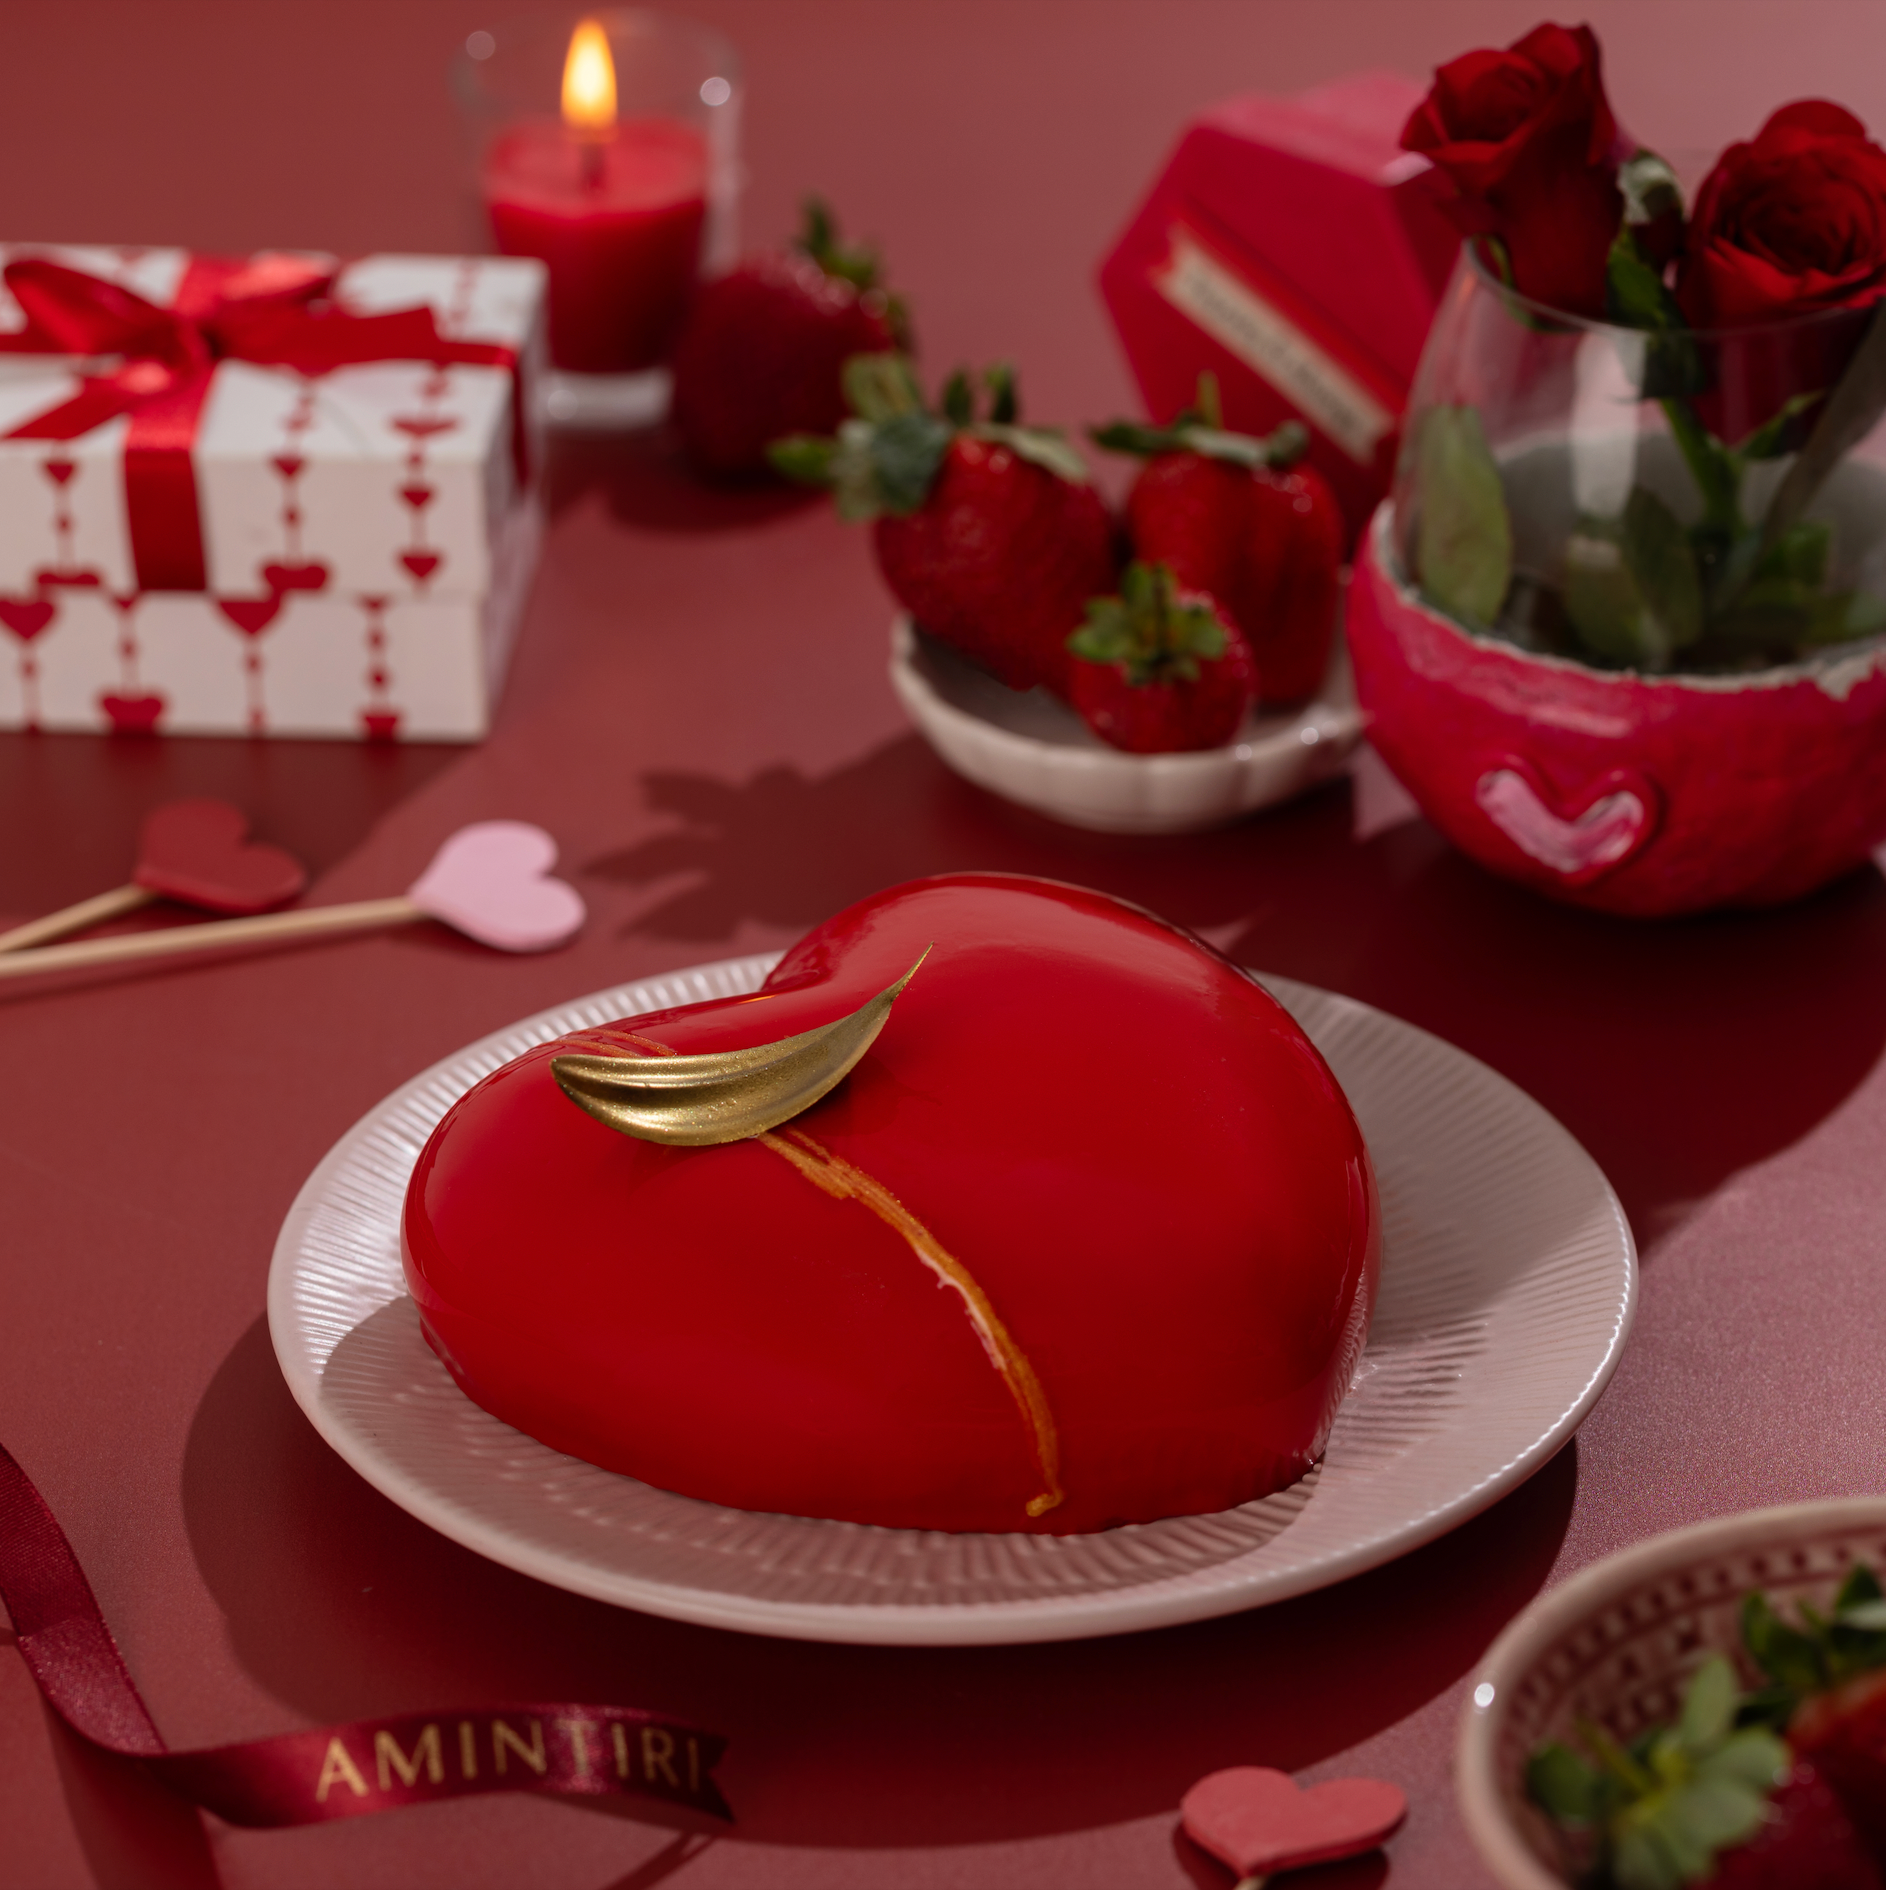 NUTELLA AND FRESH STRAWBERRY ENTREMET - Valentines special - Amintiri